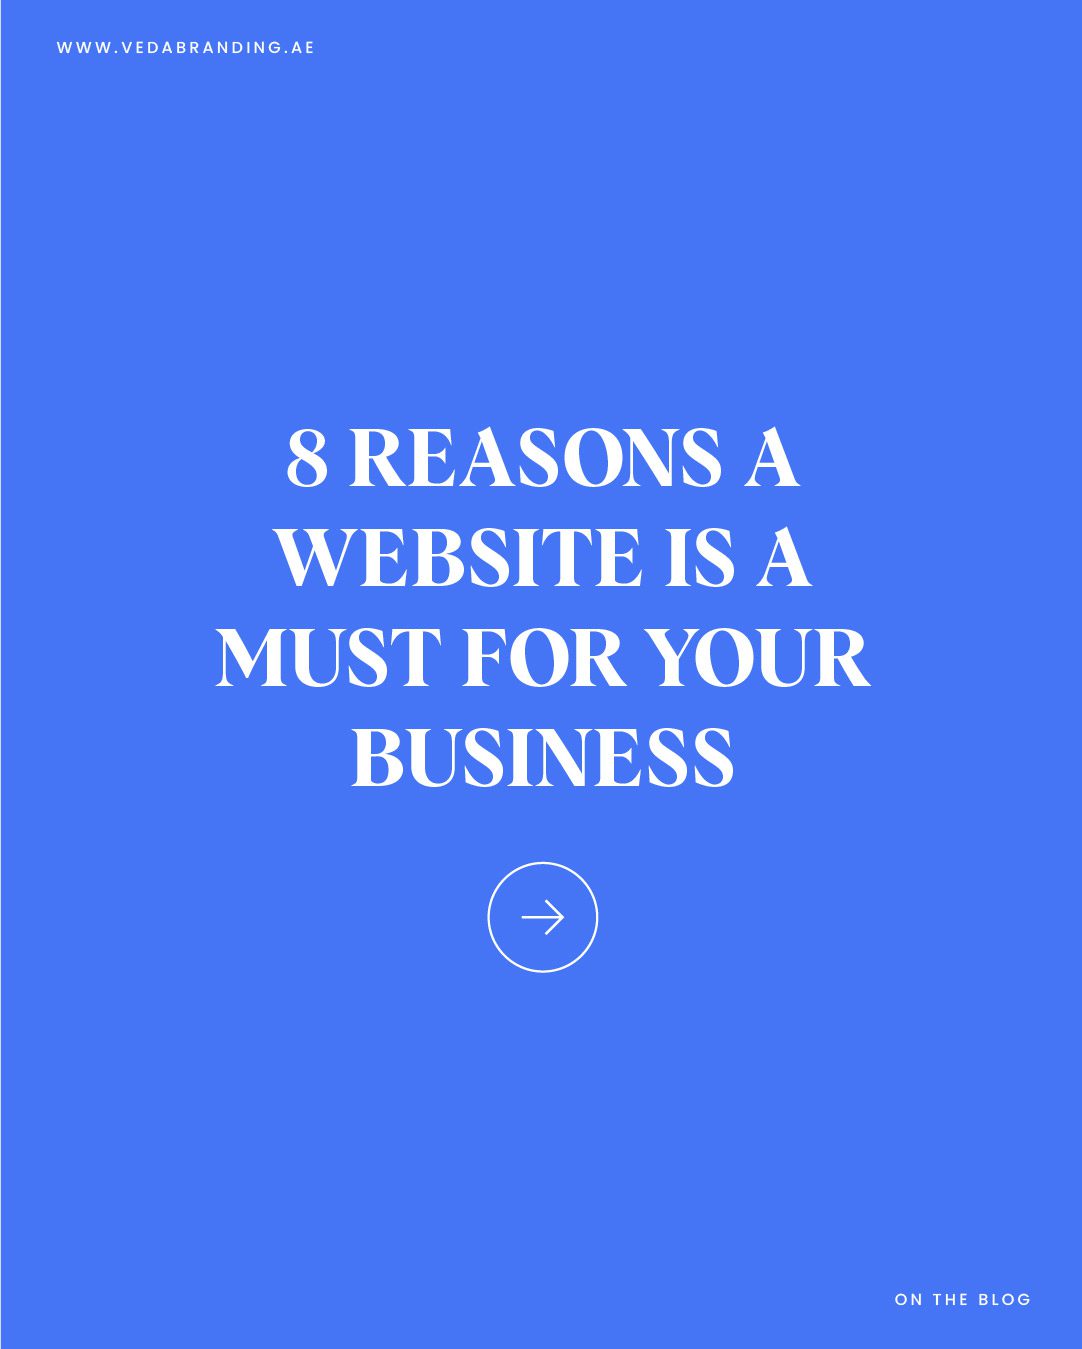 8 Reasons Why a Website is a Must for Your Business